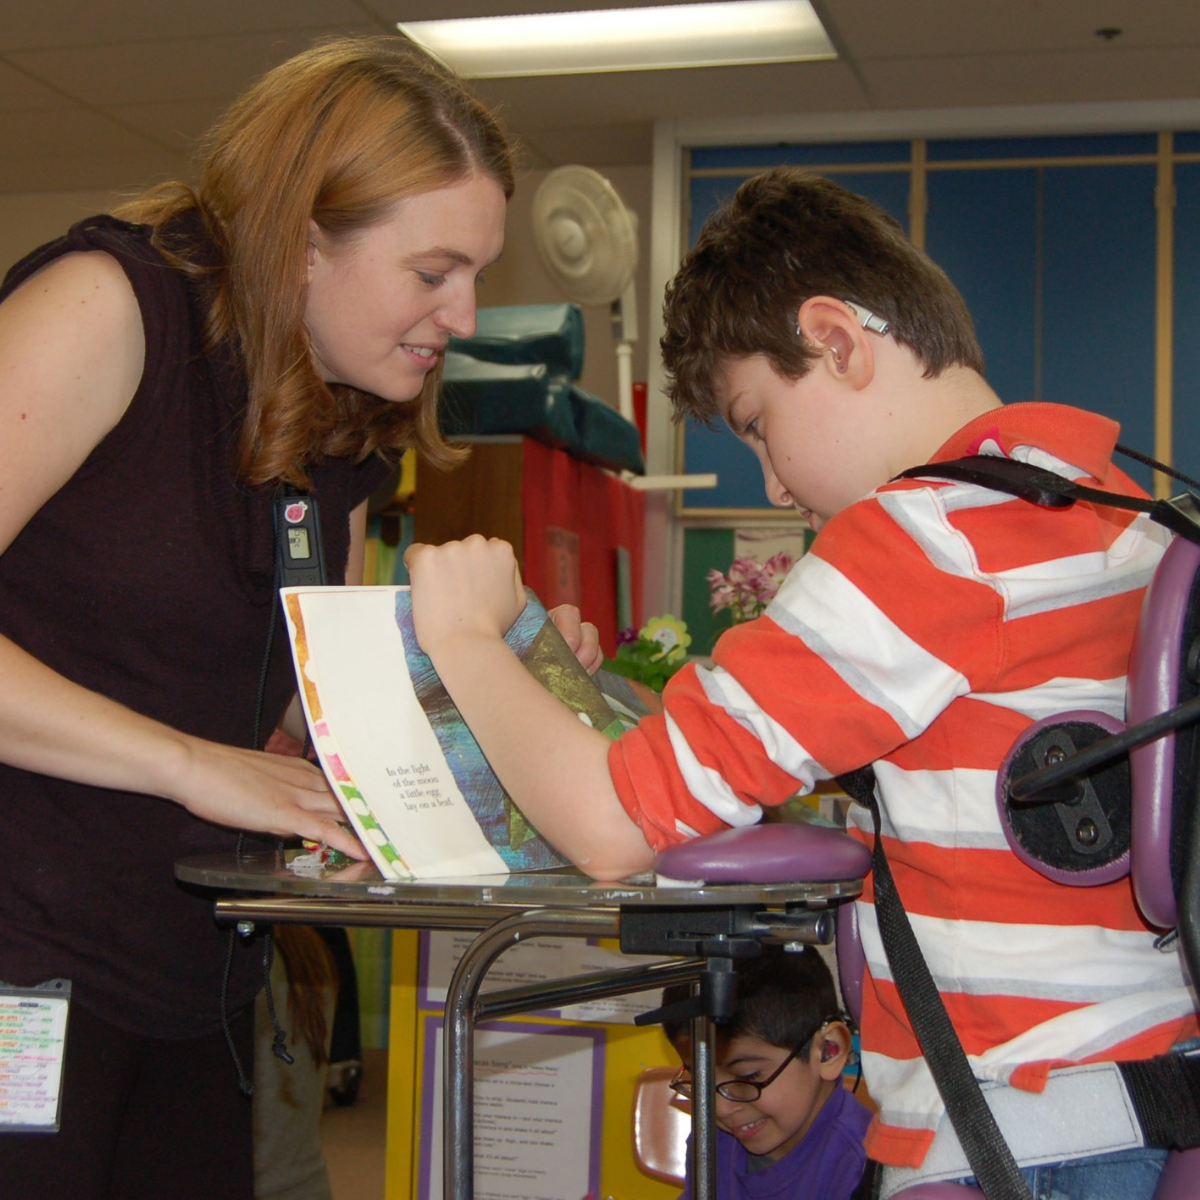 A teacher interacts with her student in a standing chair.